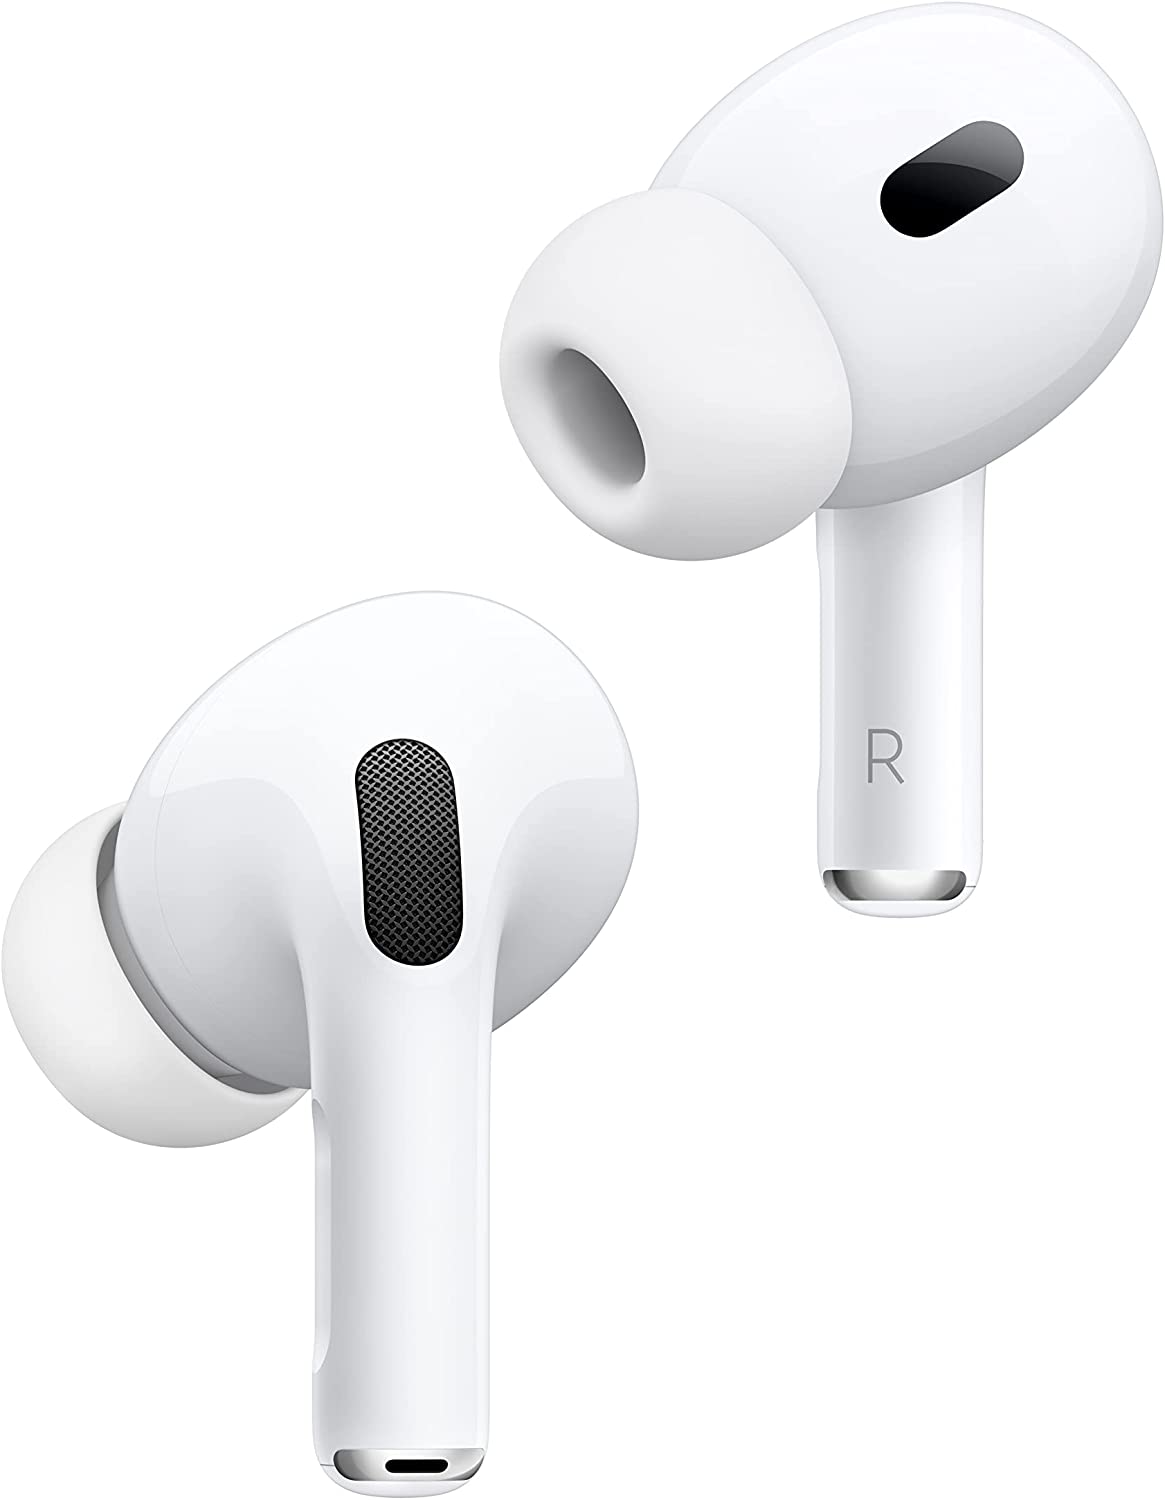 Apple AirPods Pro 2 vs Apple AirPods Pro 1